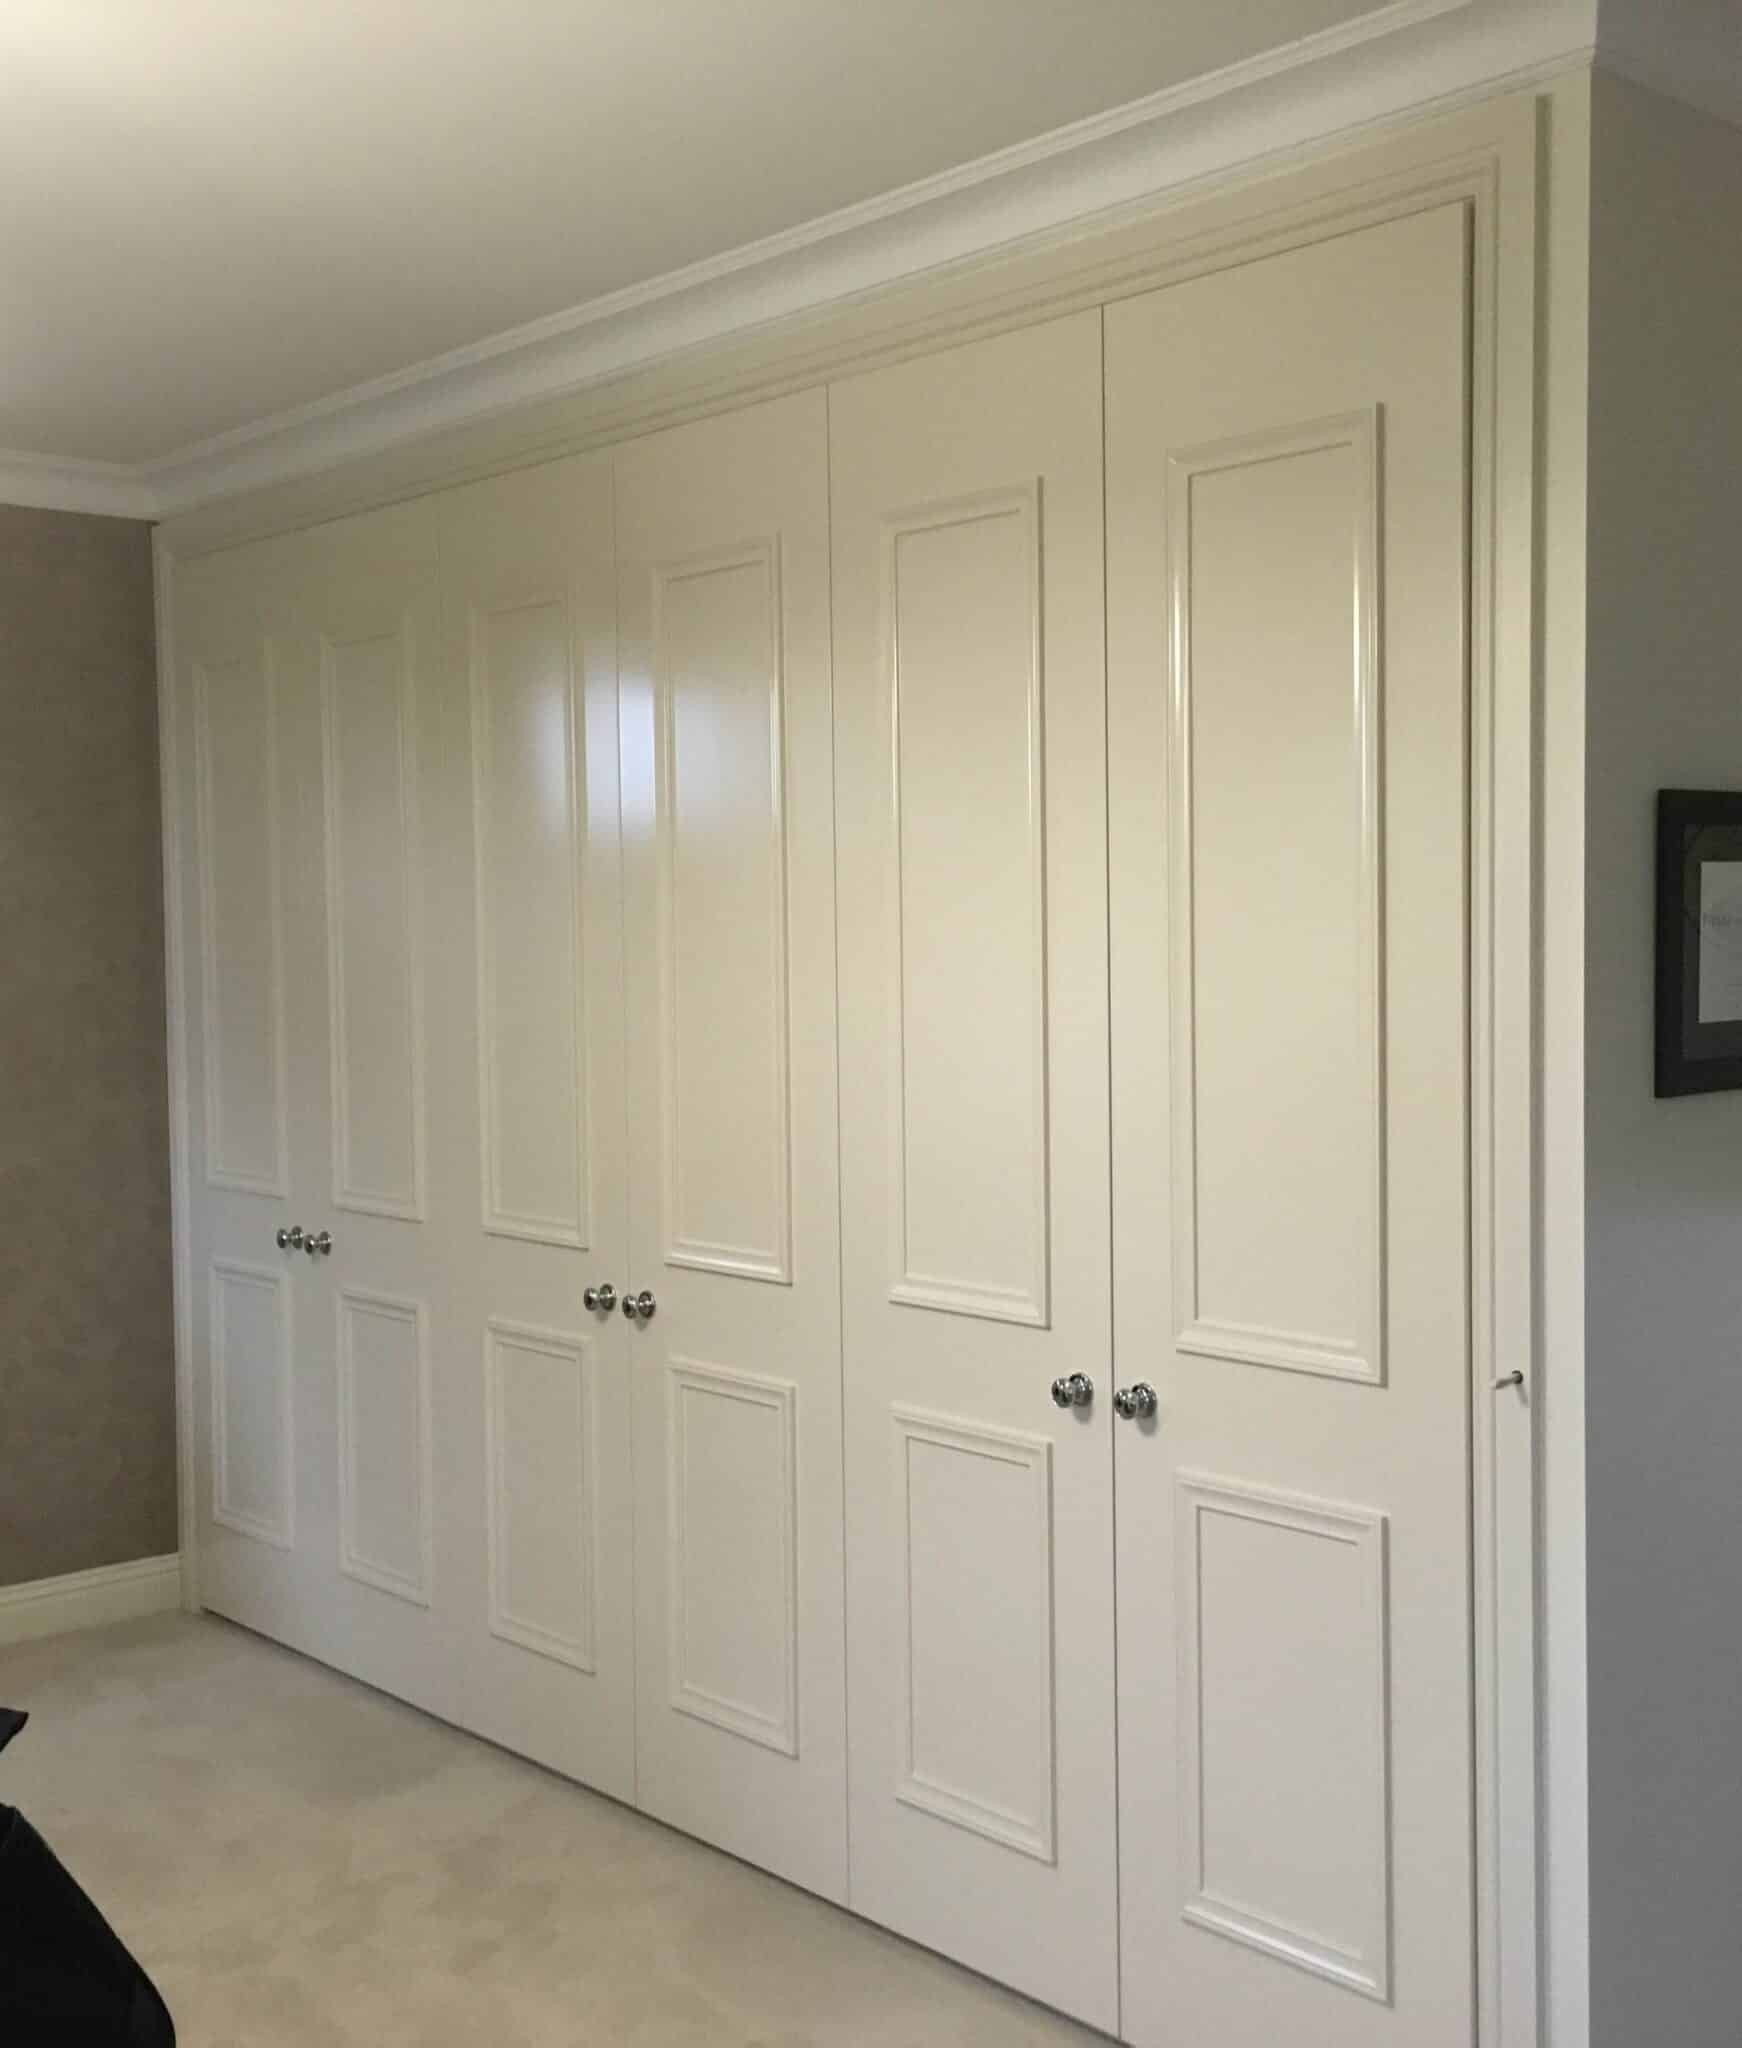 classic panel wardrobe doors off white hinged door wardrobes large built in cupboard scaled